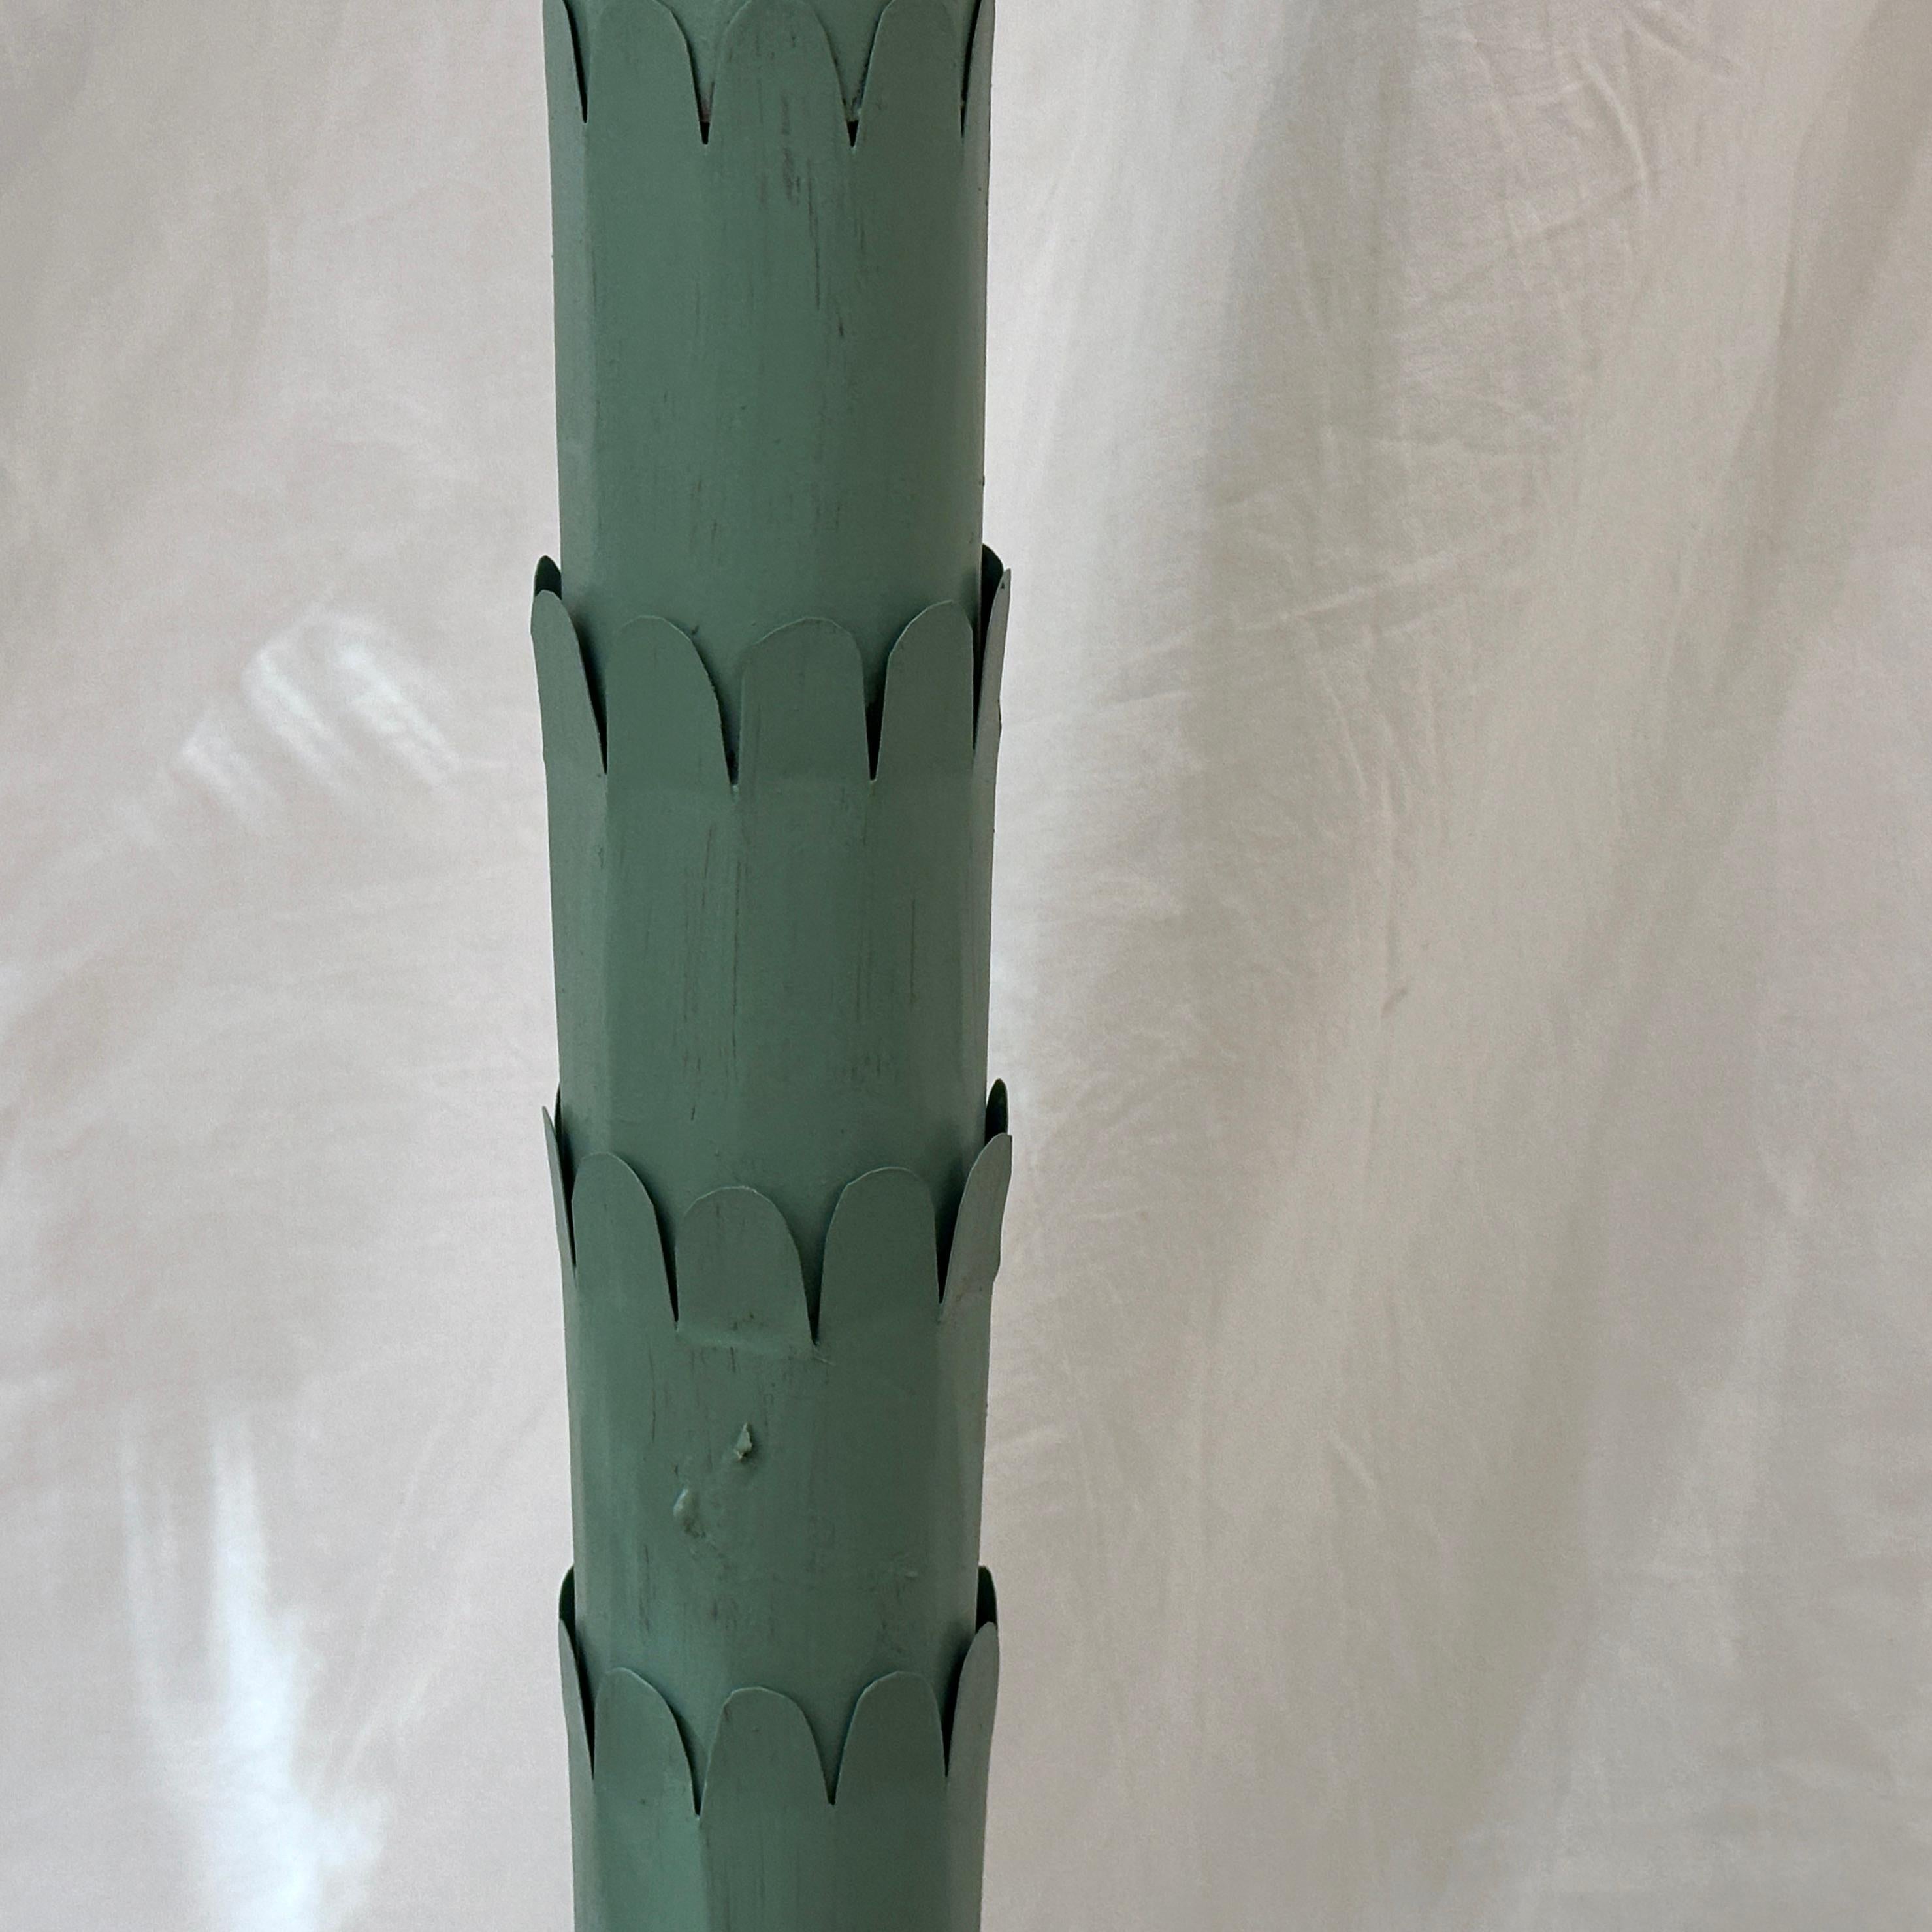 Pair of circa 1960's painted tole French floor lamps with verdigris finish.

Measurements
Height: 66